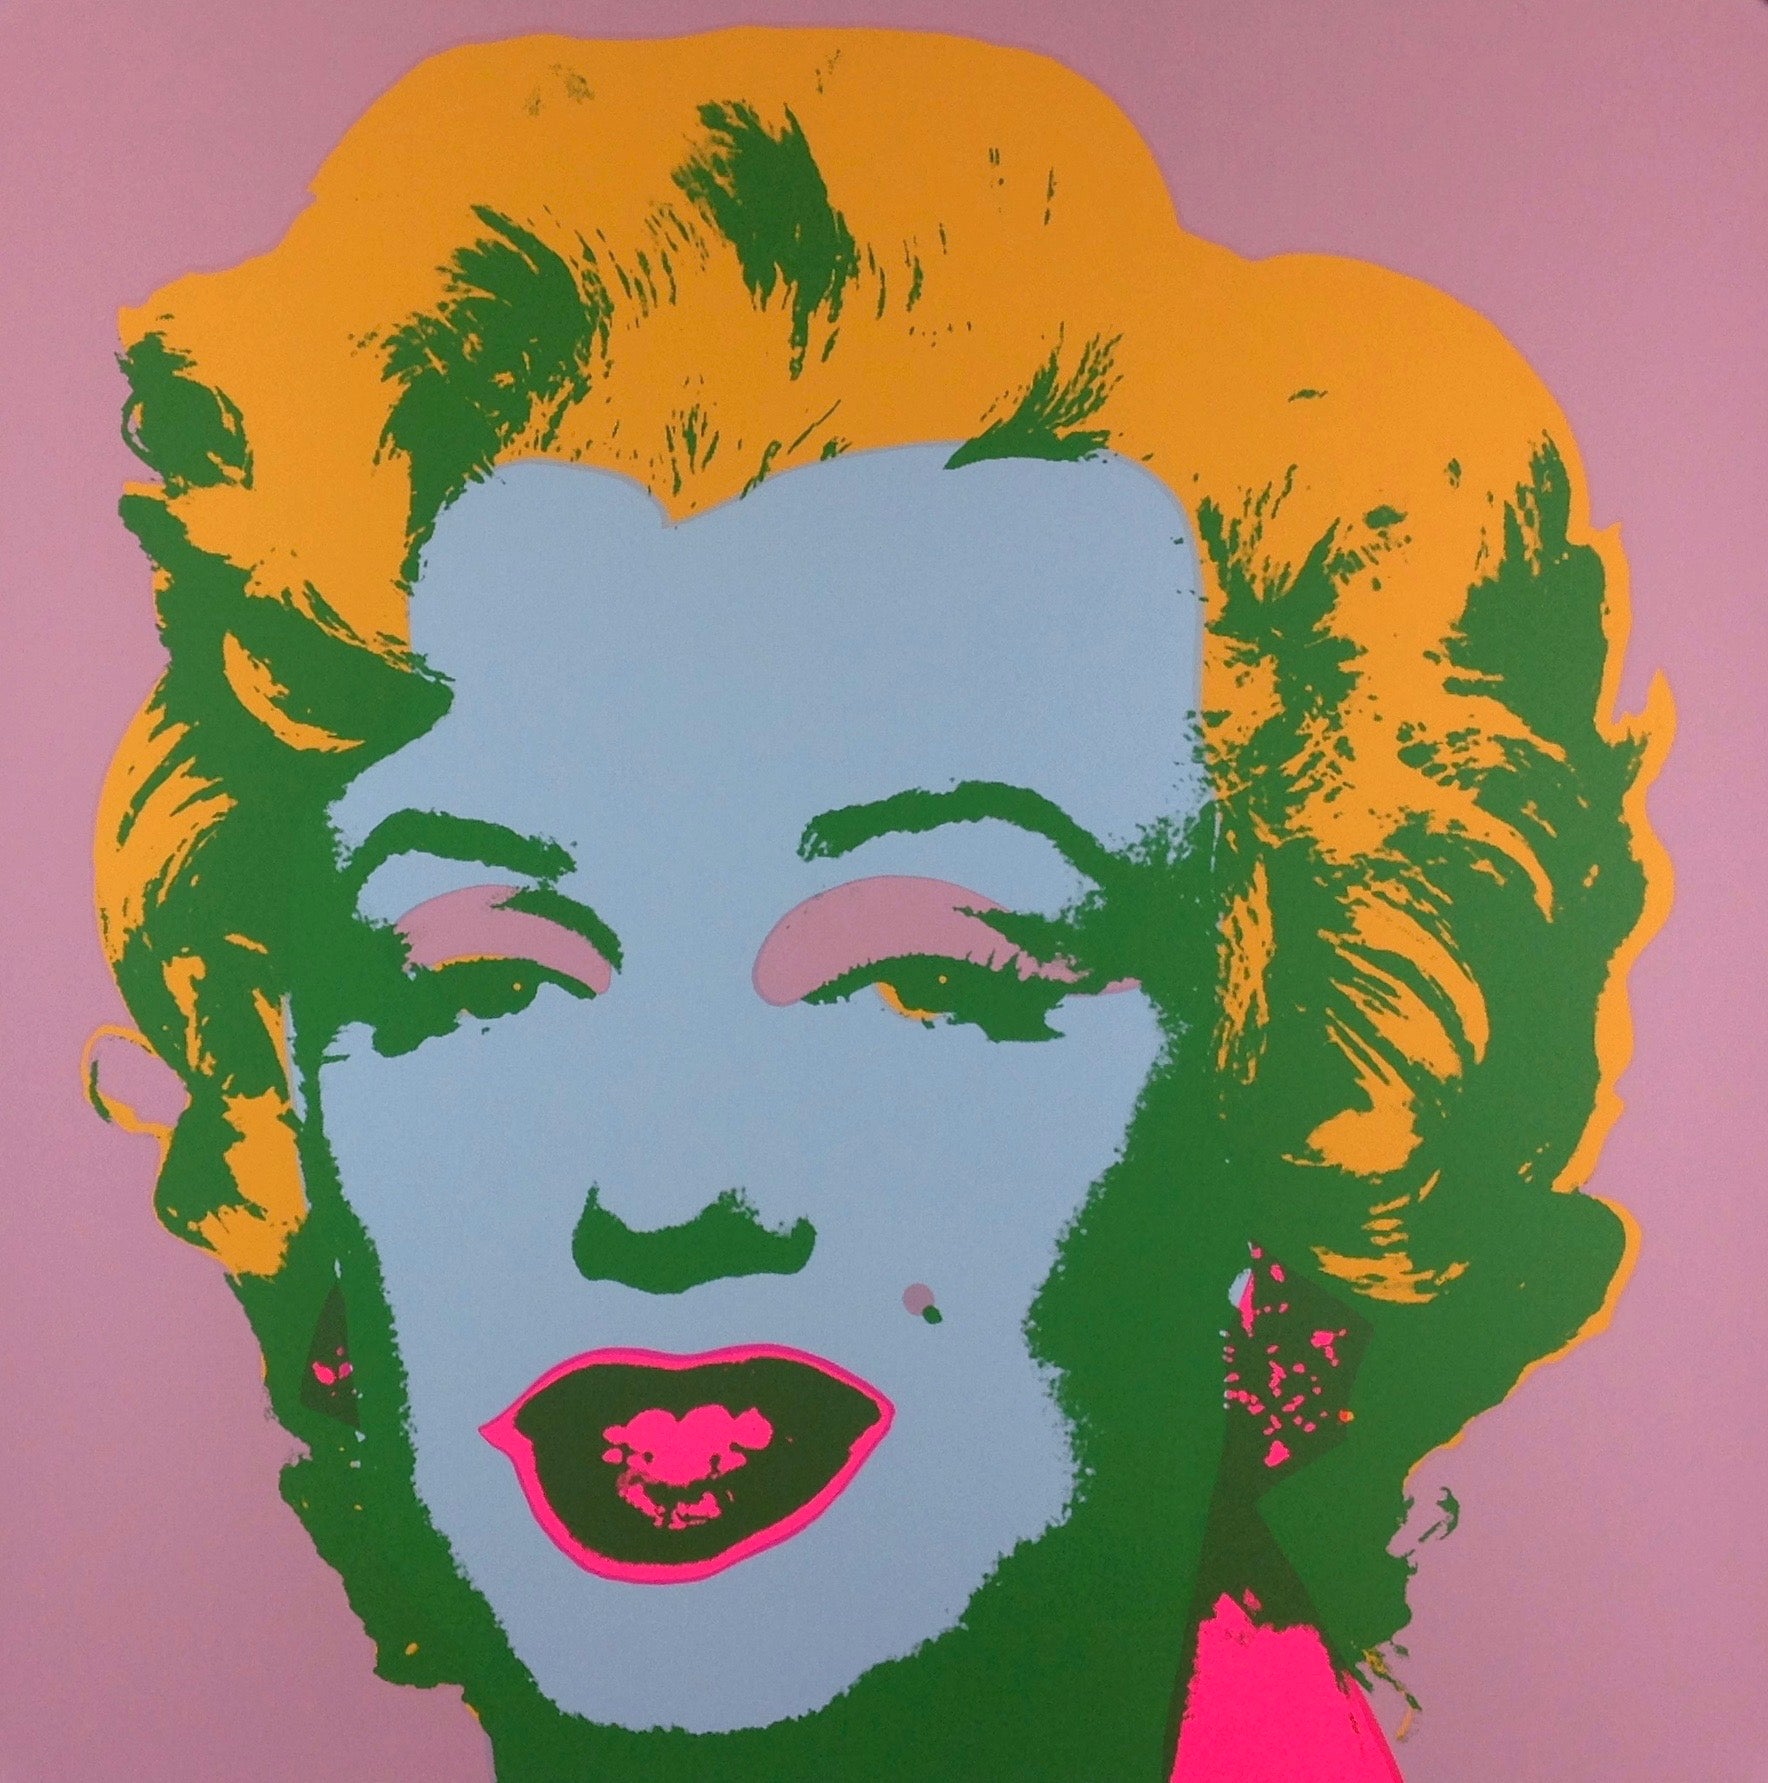 Marilyn Monroe Paint By Numbers Kit by Andy Warhol – Artware Editions